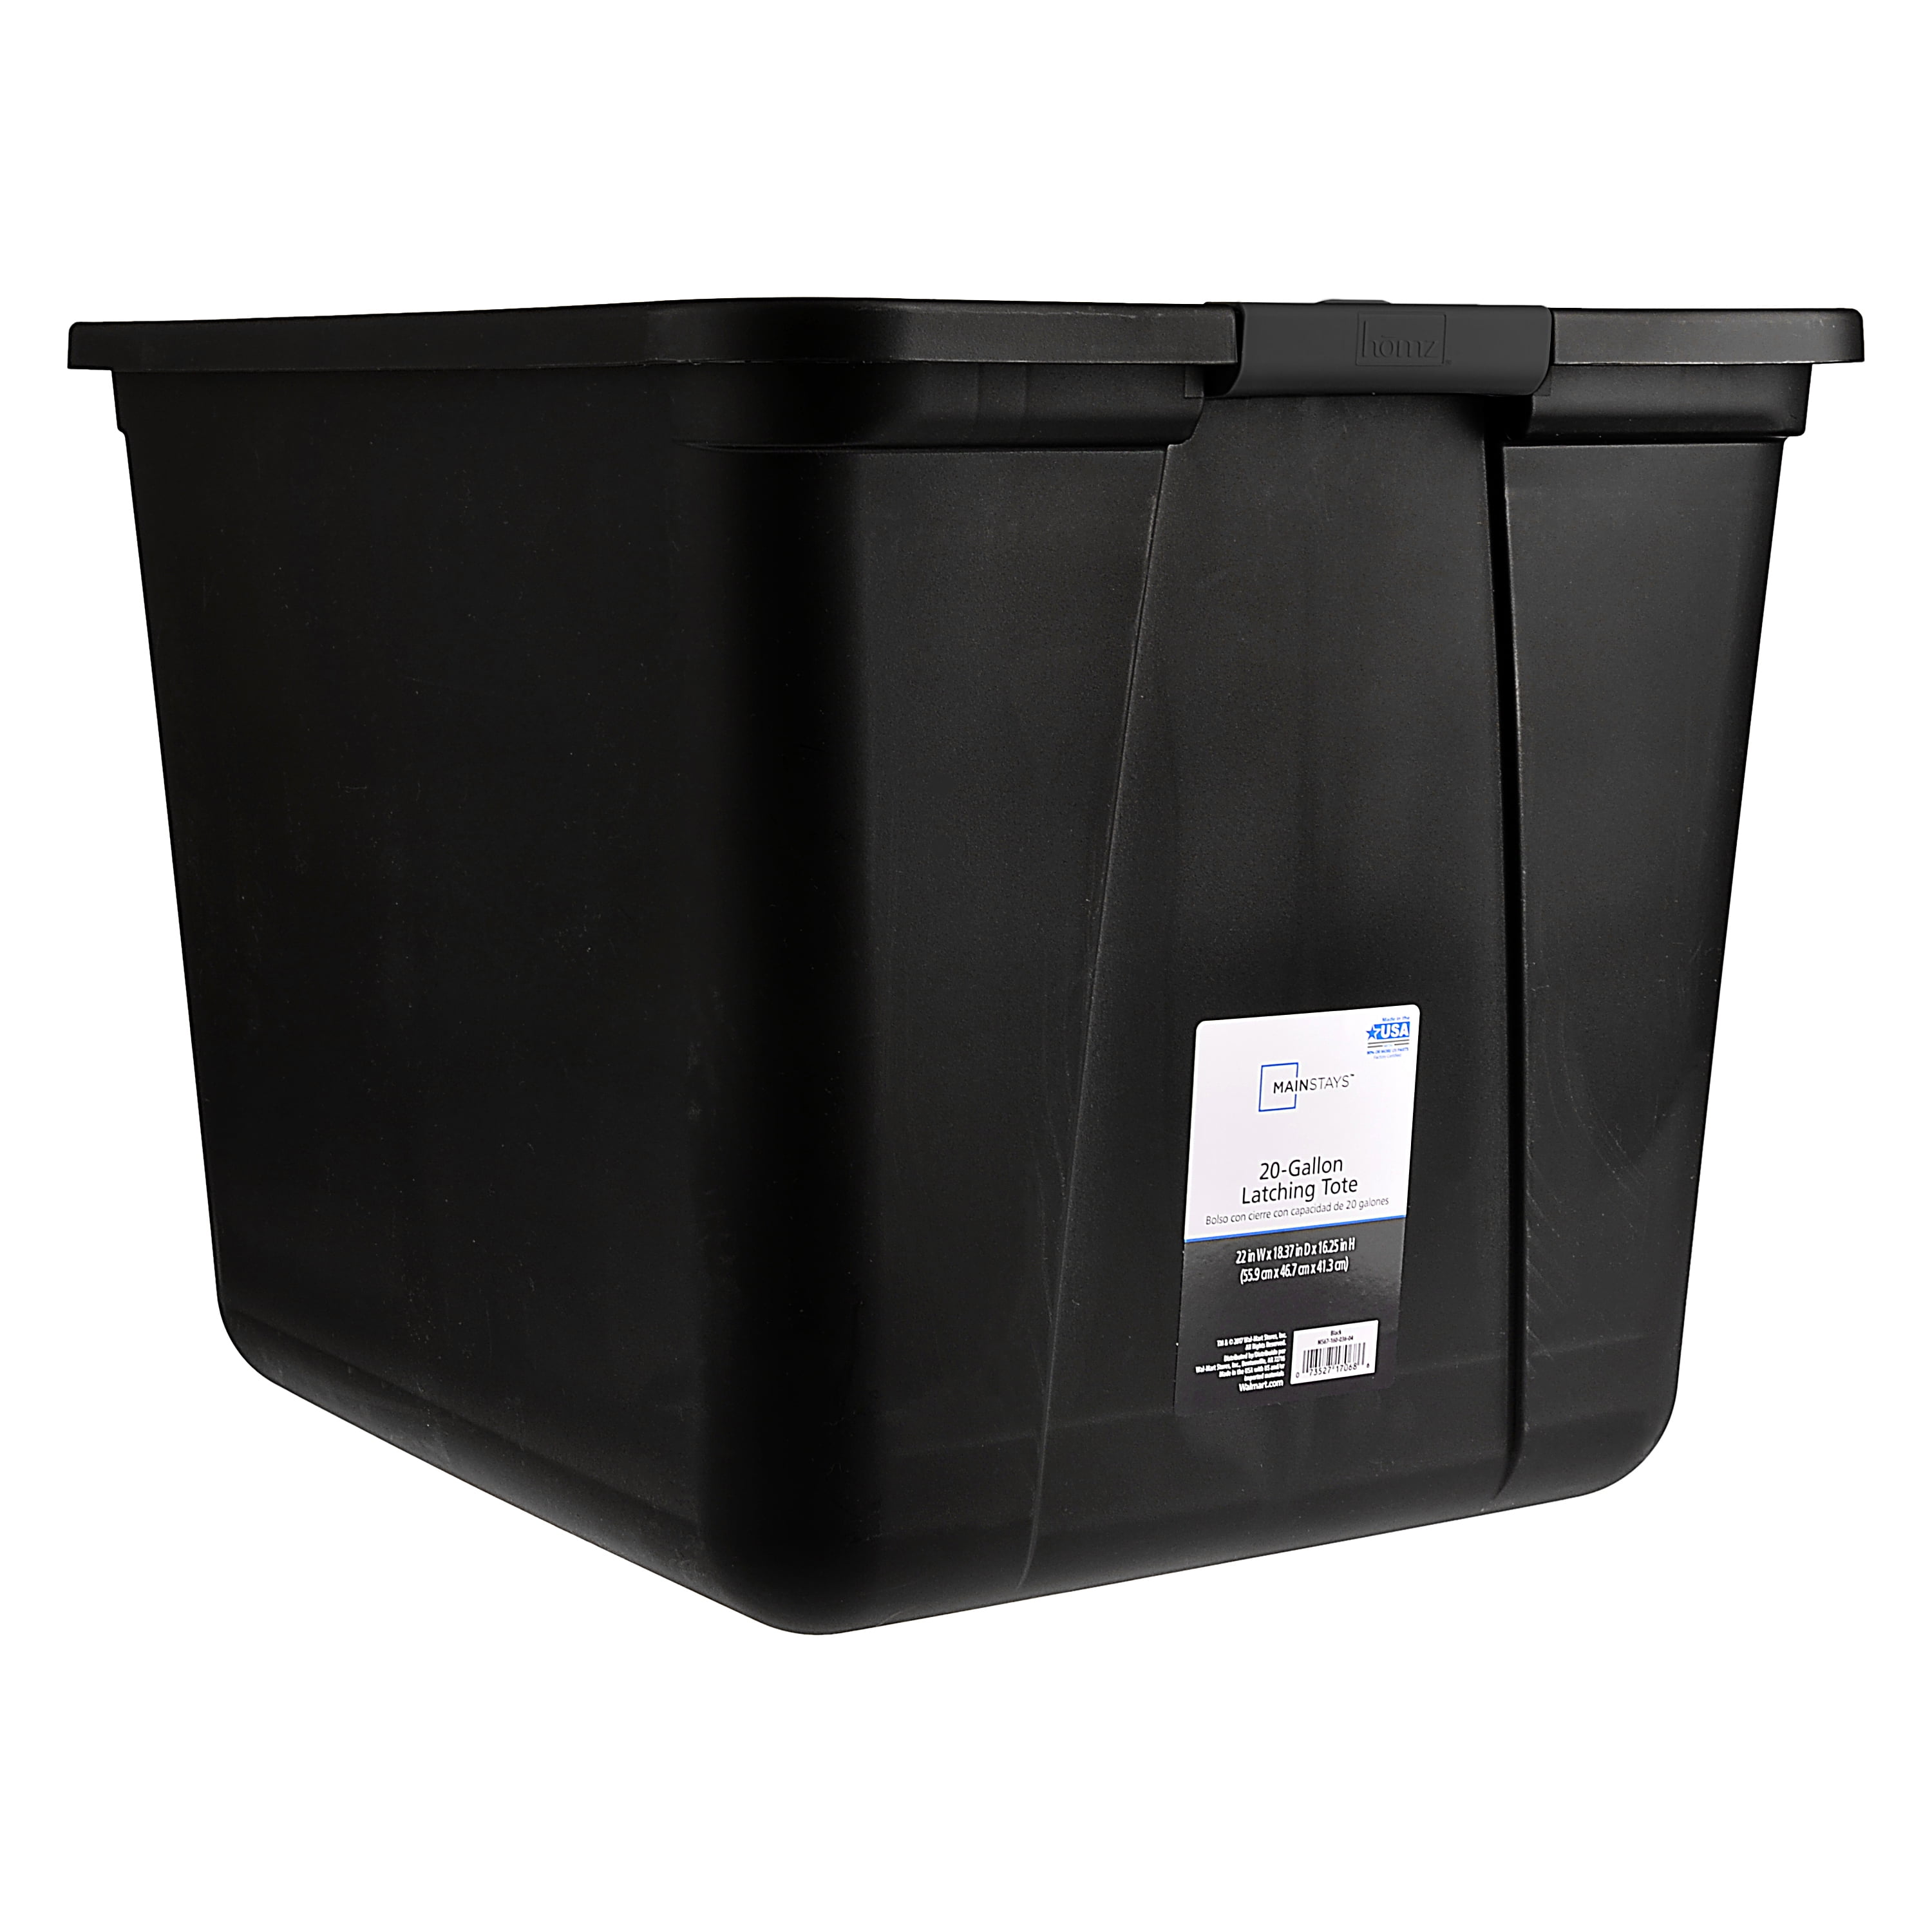 Shop Mainstays 20 Gallon Latching Storage Container, Black Base and Lid, Set of 2 from Walmart on Openhaus